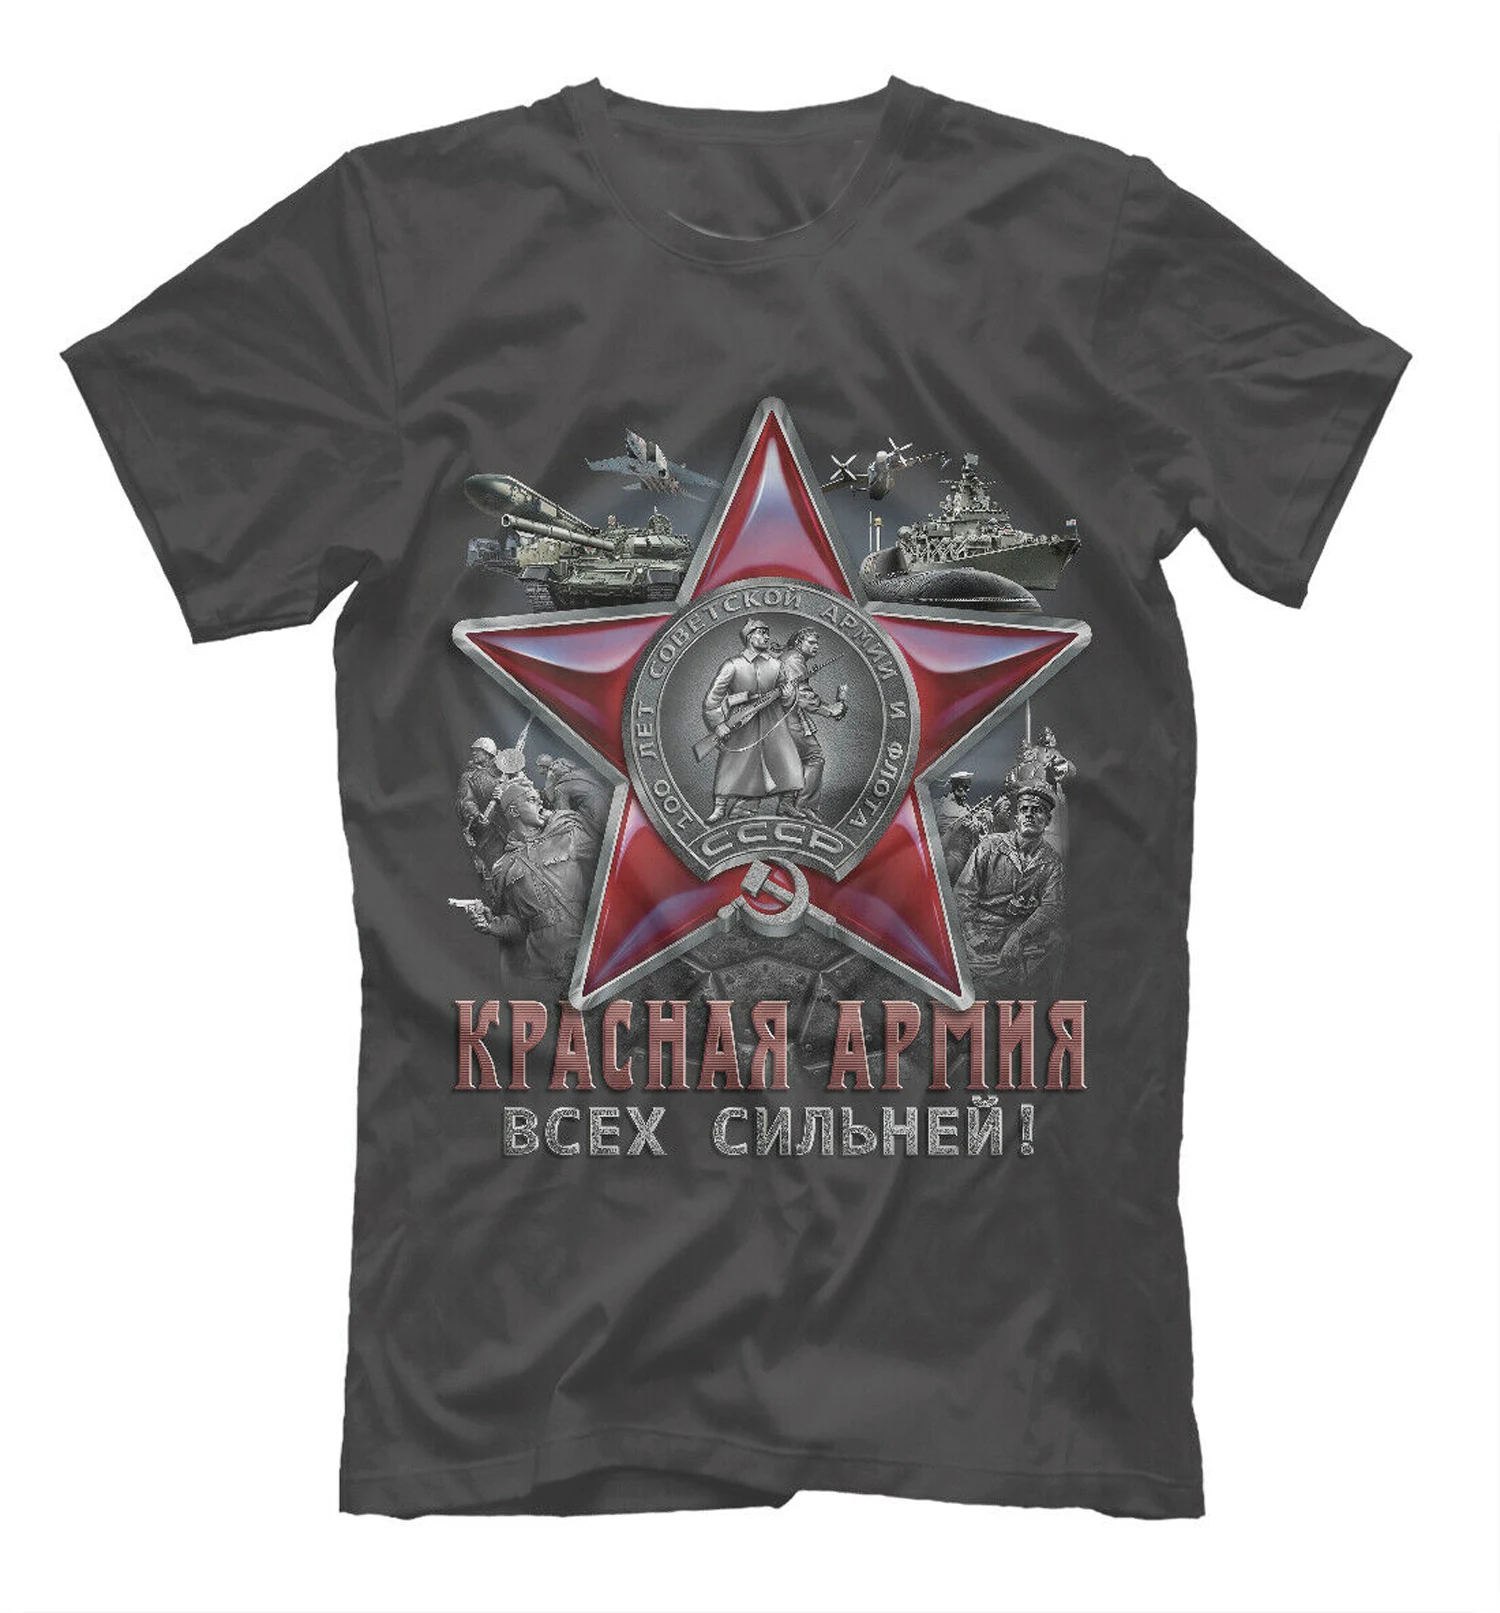 USSR "The Red Army Is The Strongest" Unique Design Russia Red Star Medal T-Shirt. Summer Cotton Short Sleeve O-Neck Mens T Shirt